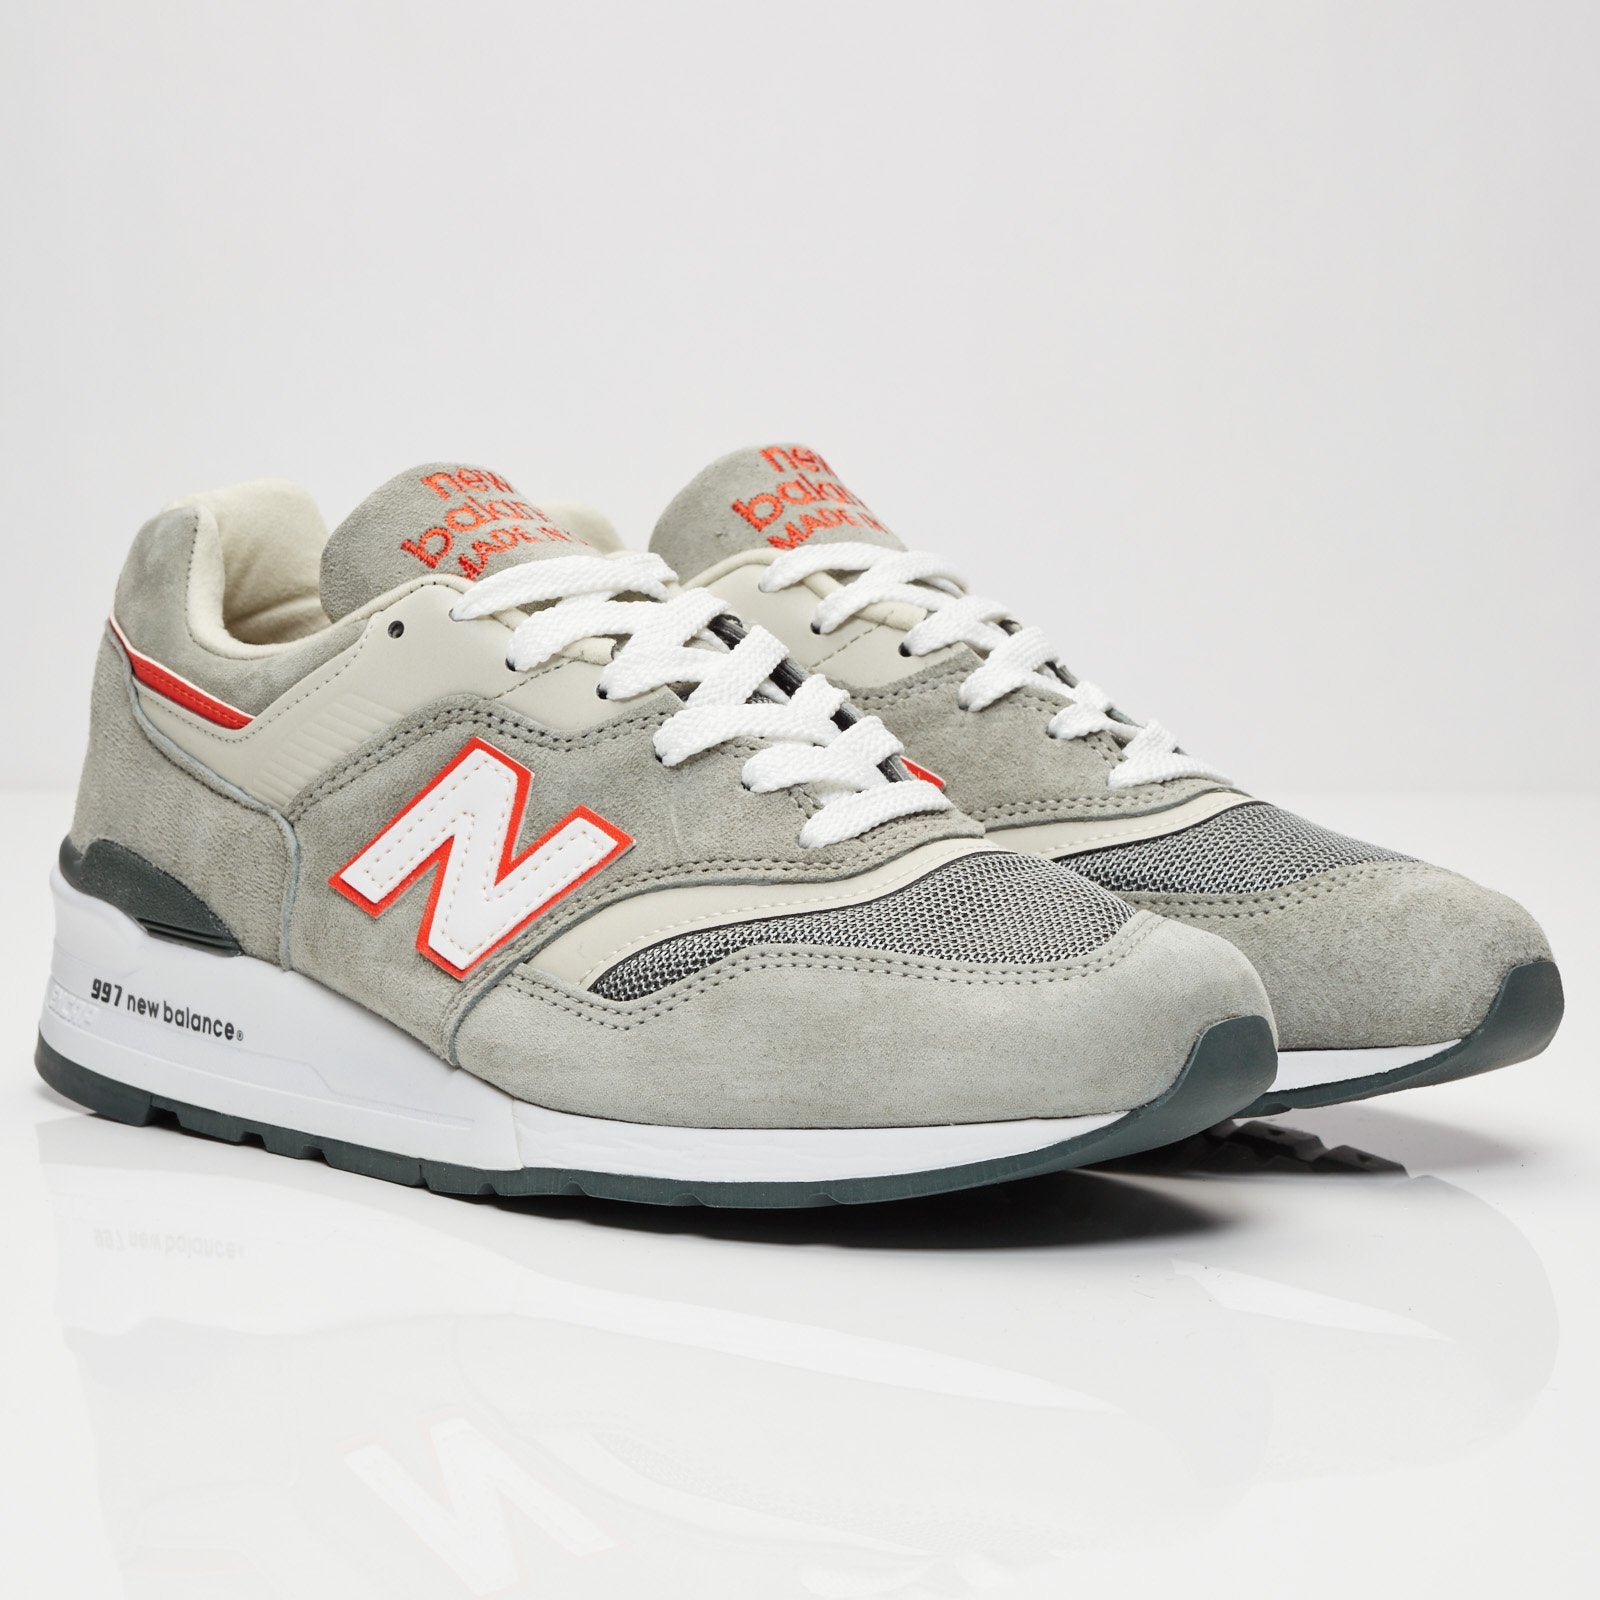 New Balance 997 Cht Made In Usa (2016) – Fmcfly Sneakers